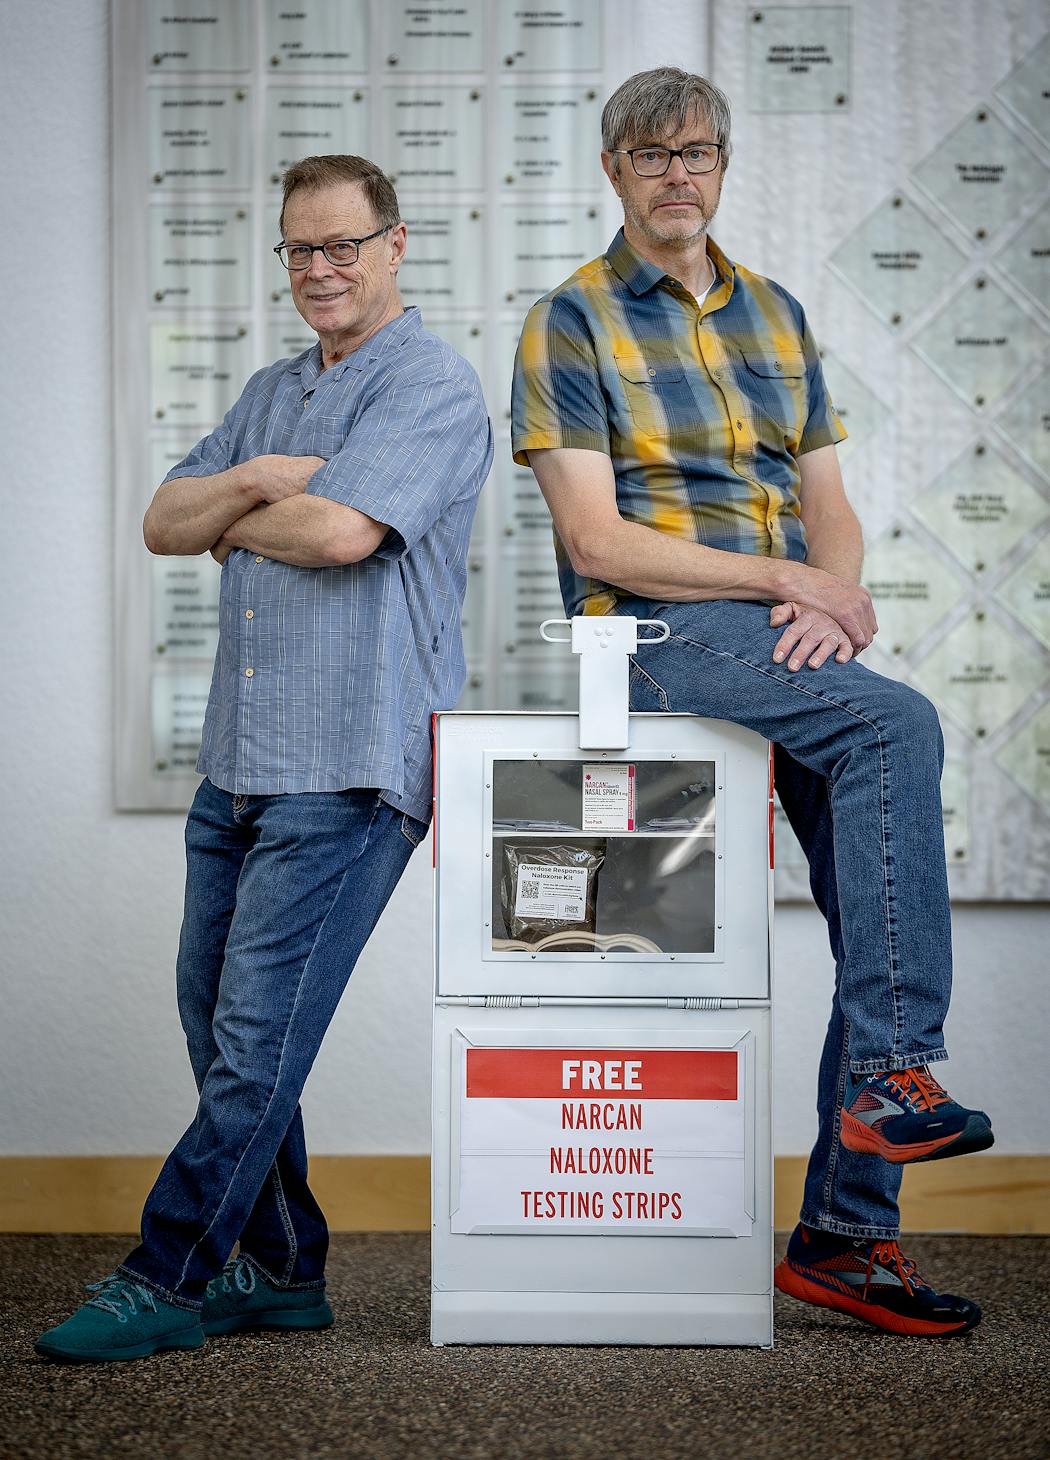 Jim Barrett, left, and Andrew Kamin-Lyndgaard with the former Star Tribune paper boxes they converted into free naloxone kit dispensers. They both were inspired to create the boxes, filled with Narcan and fentanyl detector strips, because of the rise in overdose deaths. The Star Tribune sells decommissioned paper boxes for $20 each.